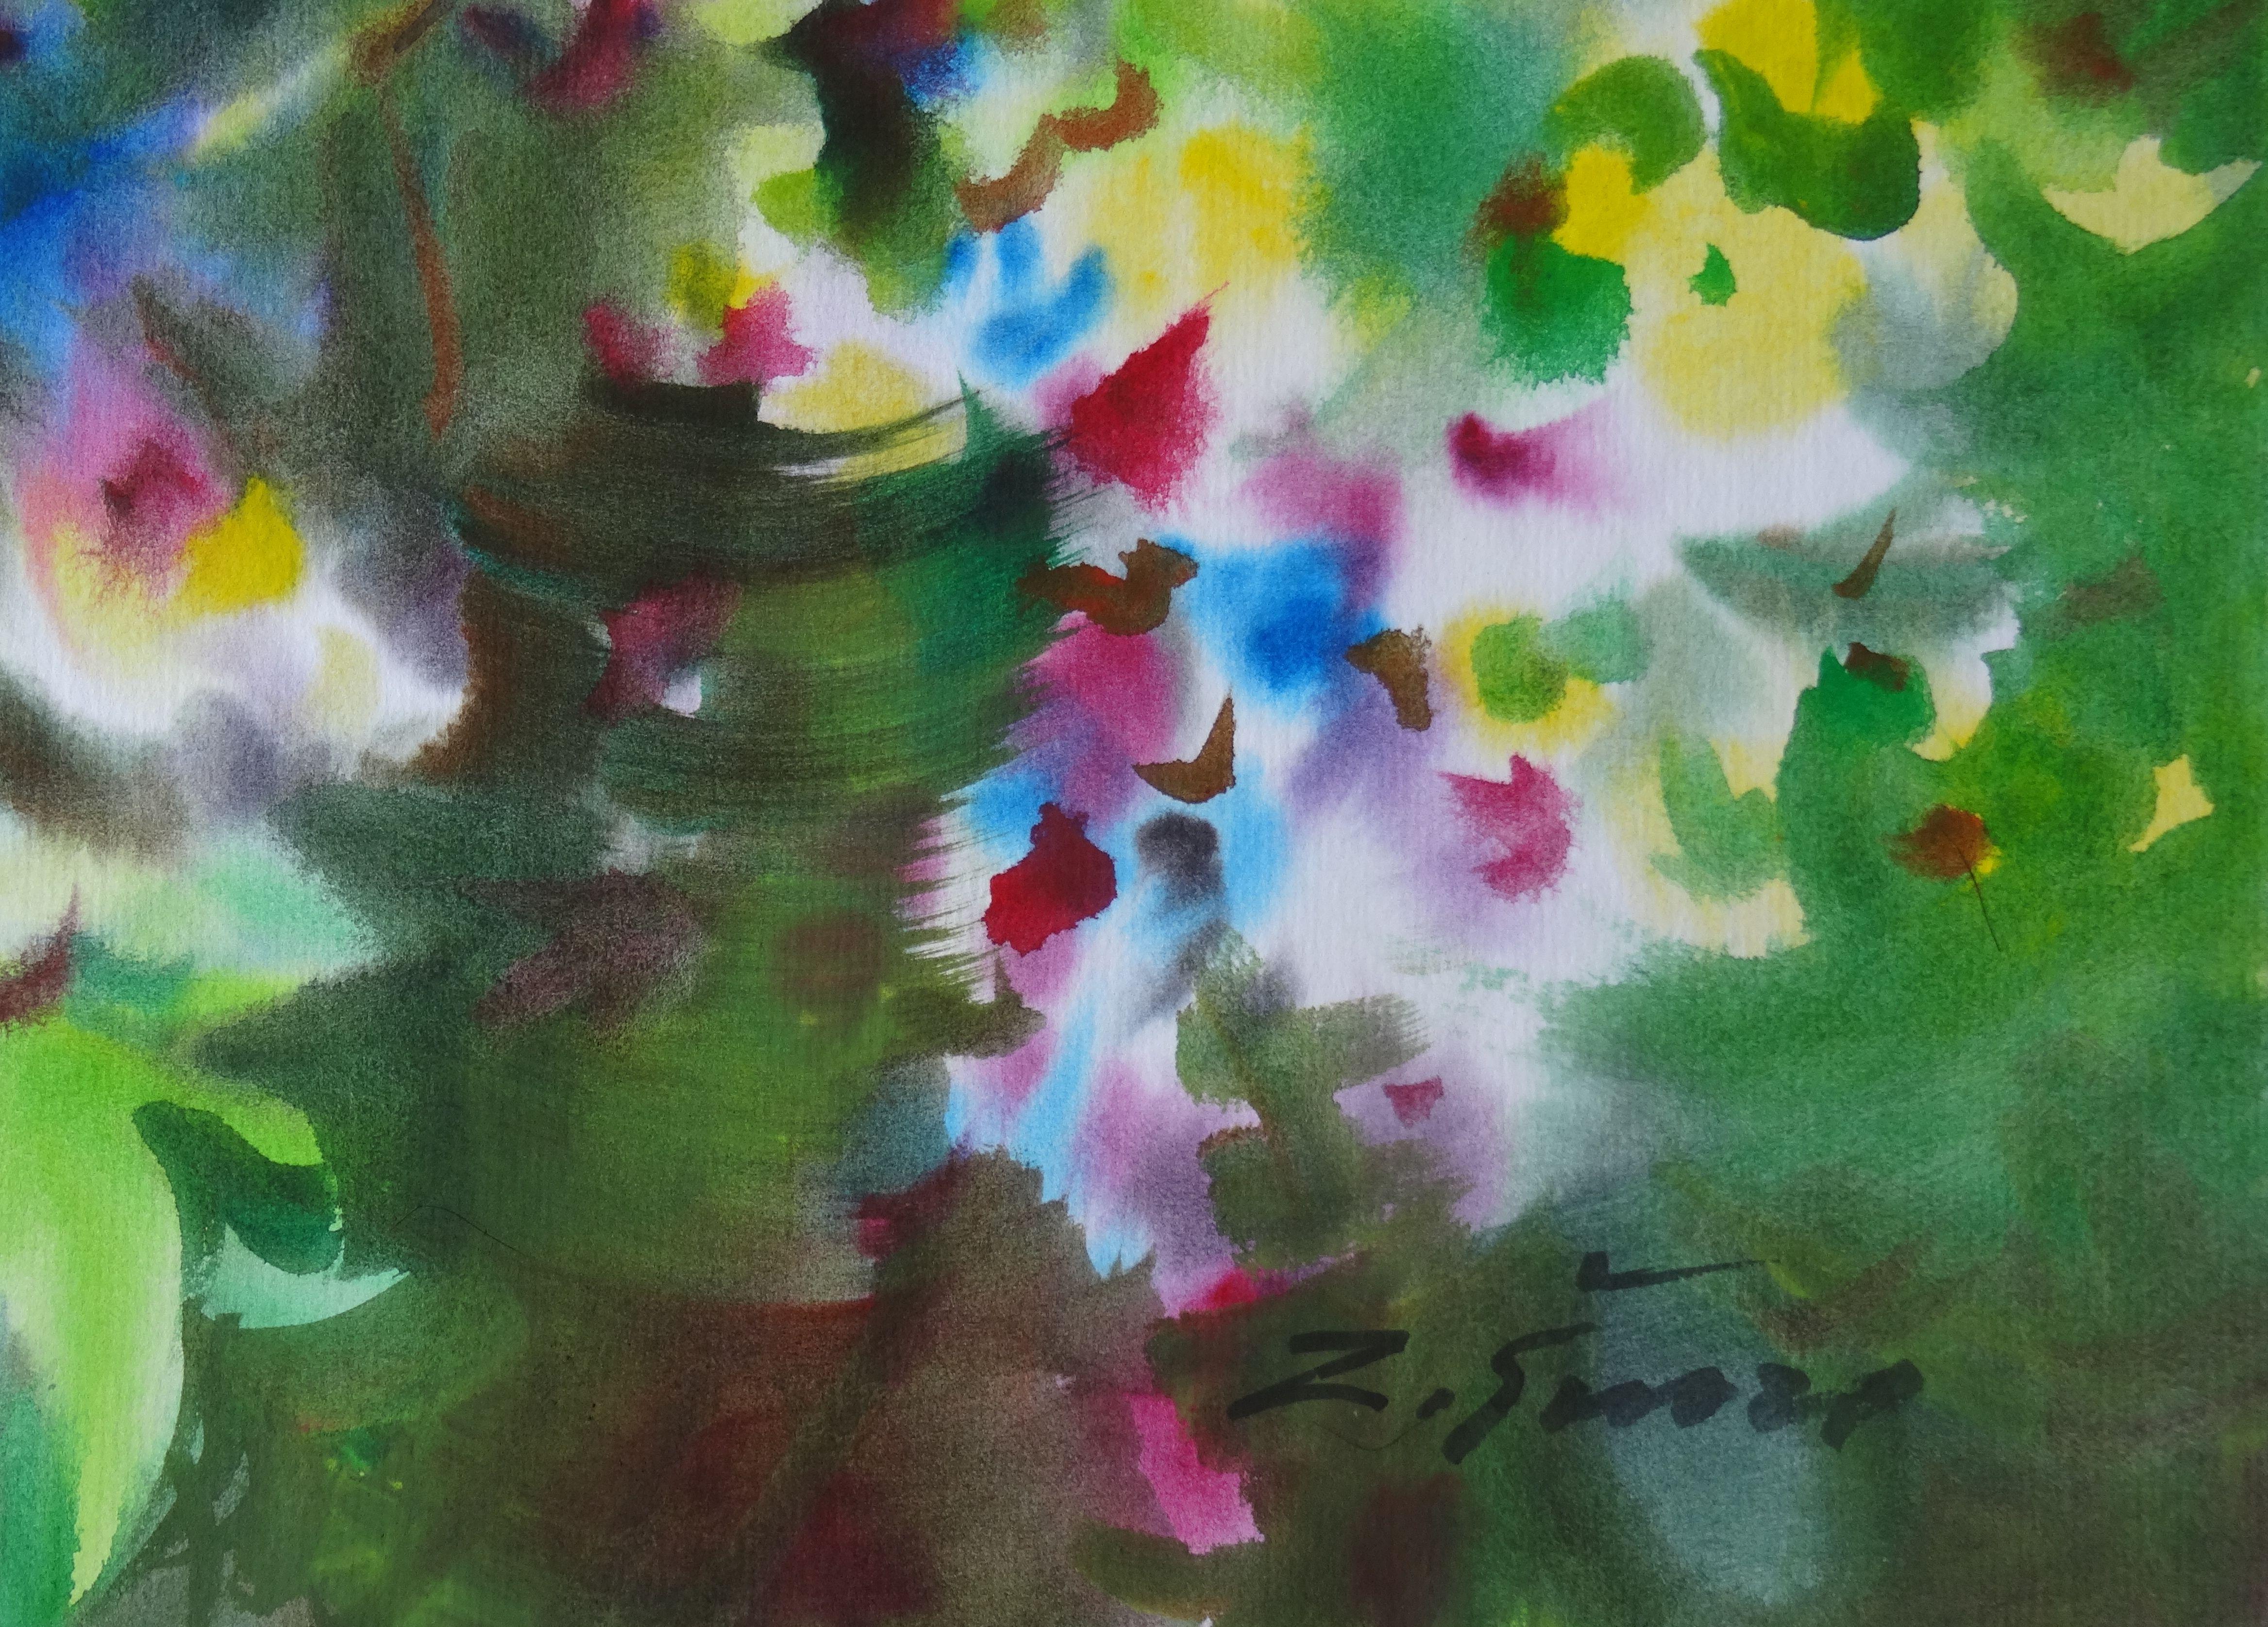 Bright summer flowers. 2020. Watercolor, paper, 74 x 59 cm - Painting by Zigmunds Snore 